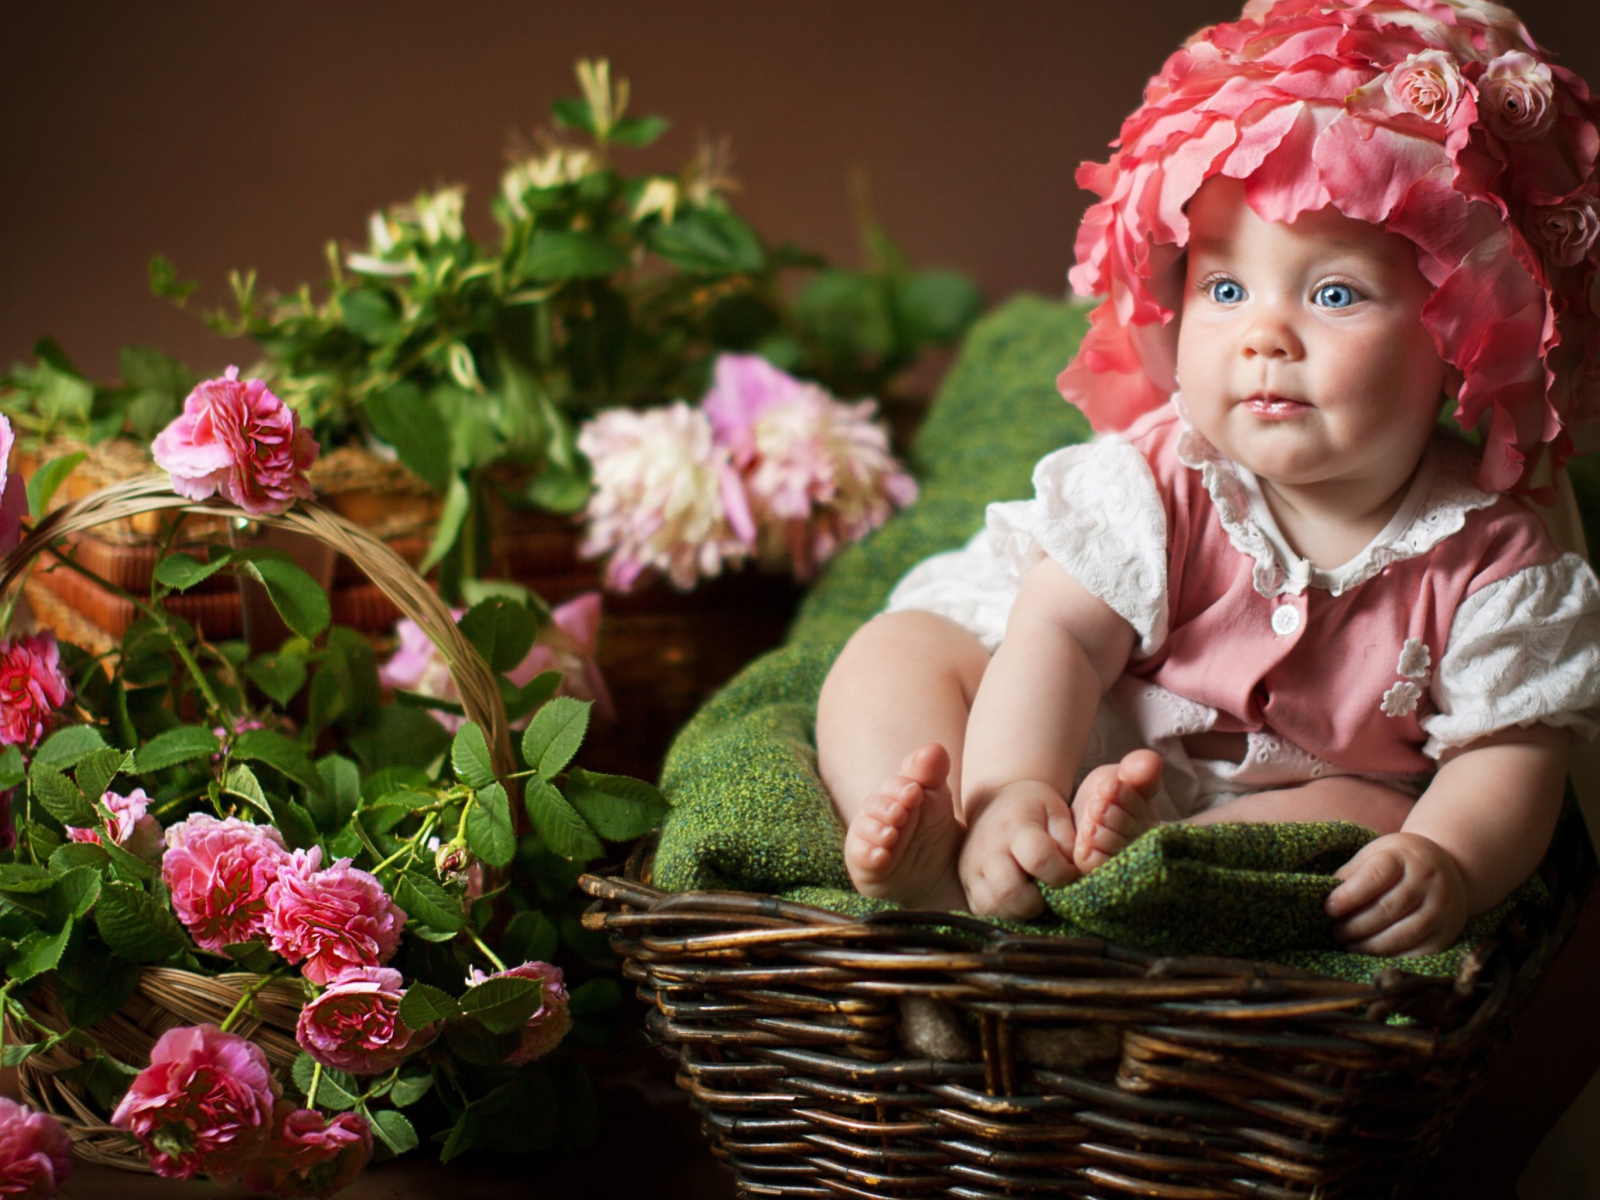 Cute Baby With Blue Eyes And Roses screenshot #1 1600x1200